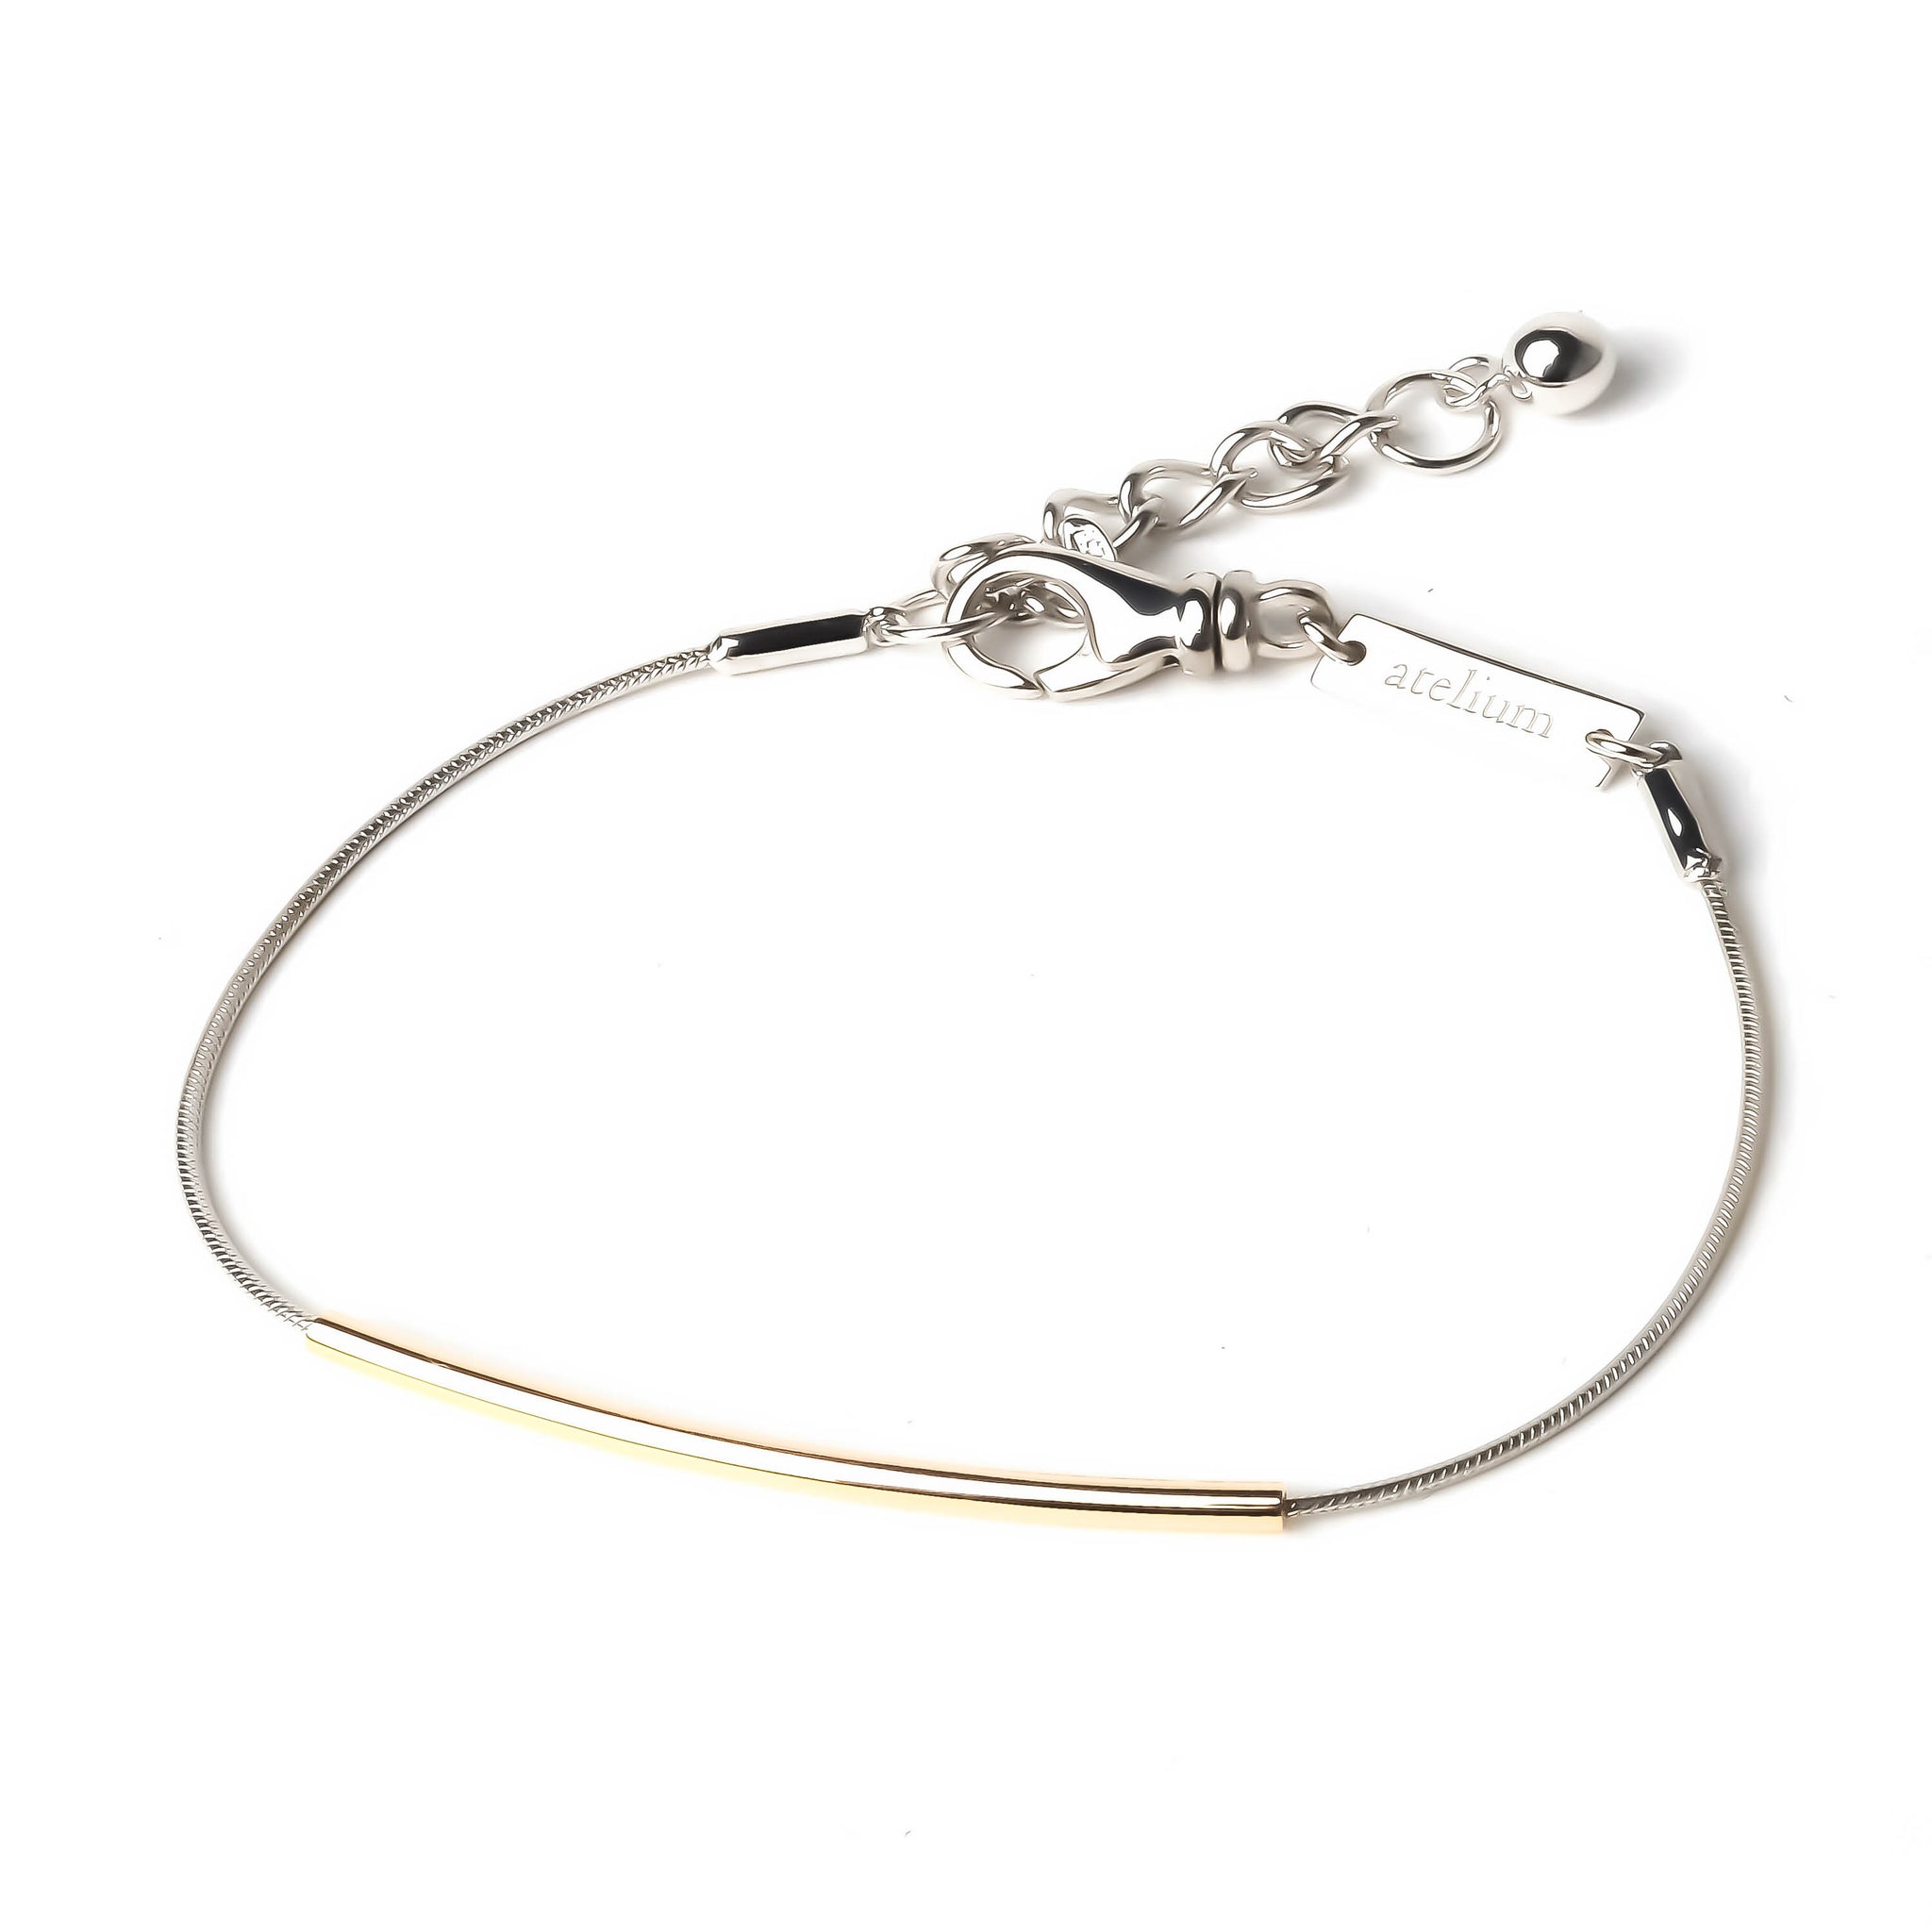 A bracelet with a gold tube on a 1.8mm silver Round Snake chain